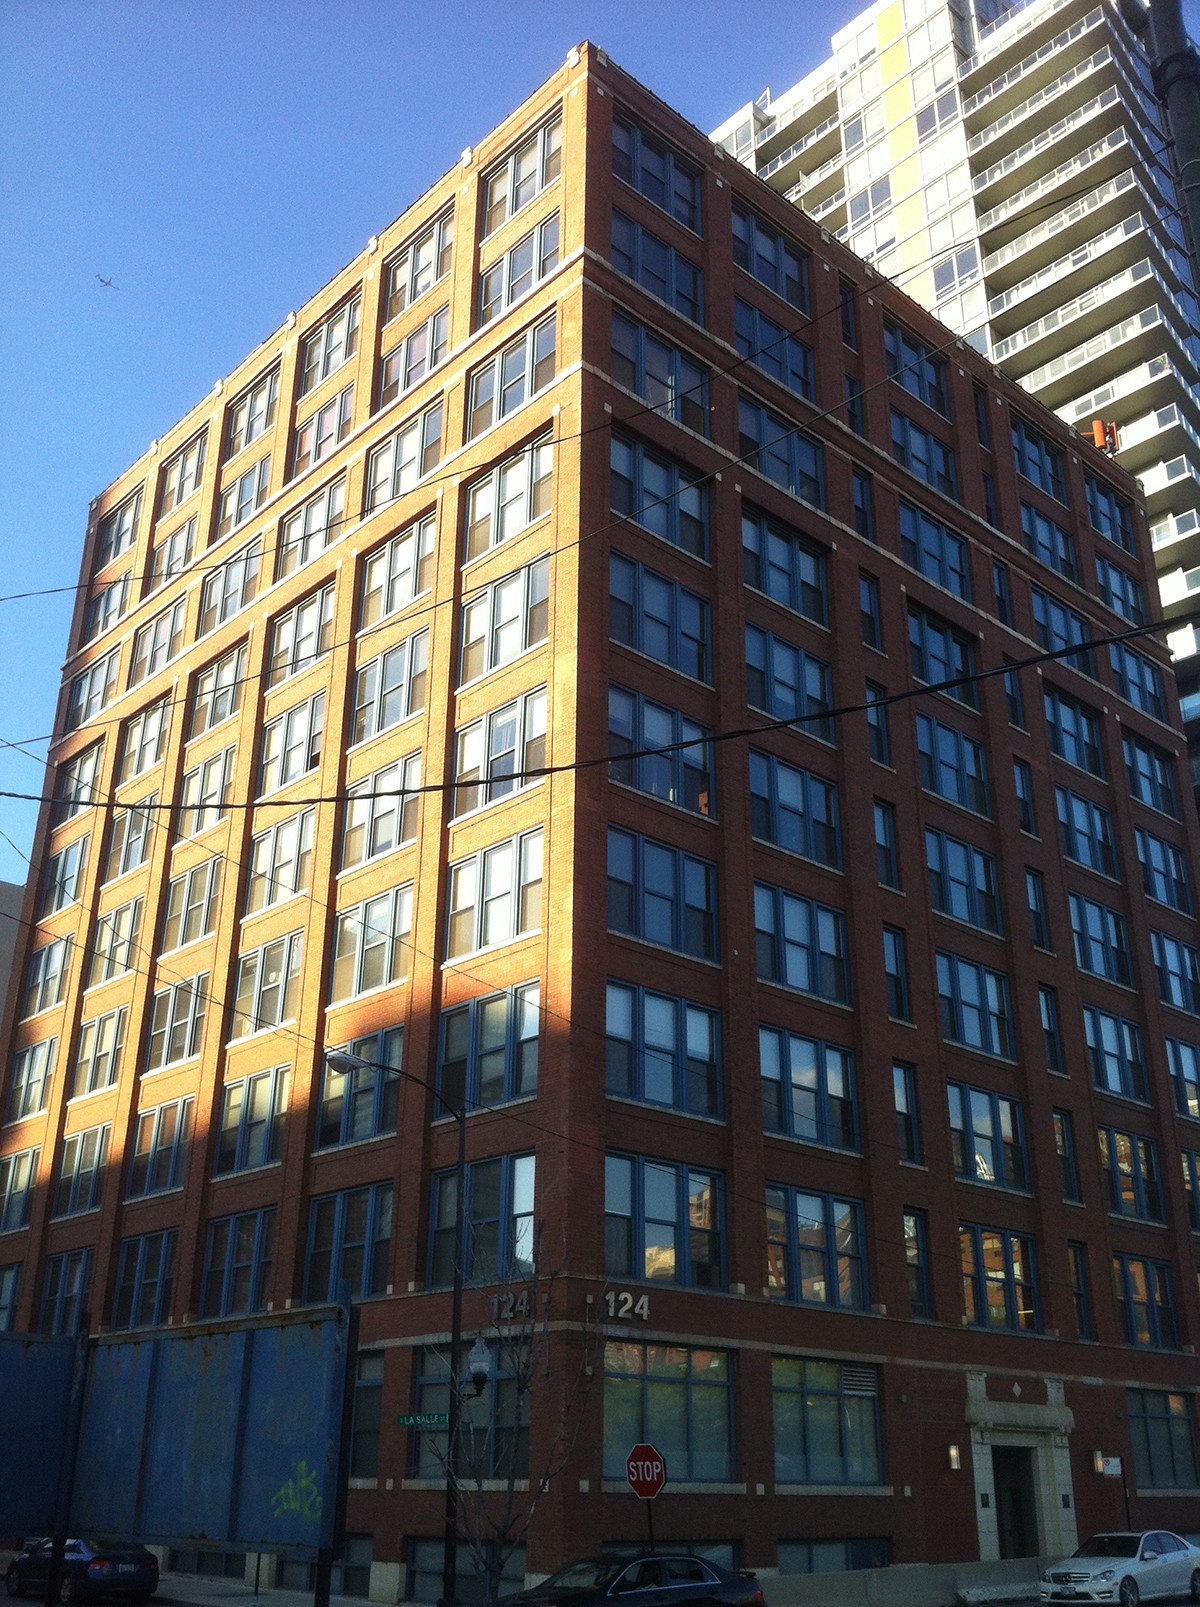 Commercial Building Architecture- Polk Street Lofts- Chicago, IL